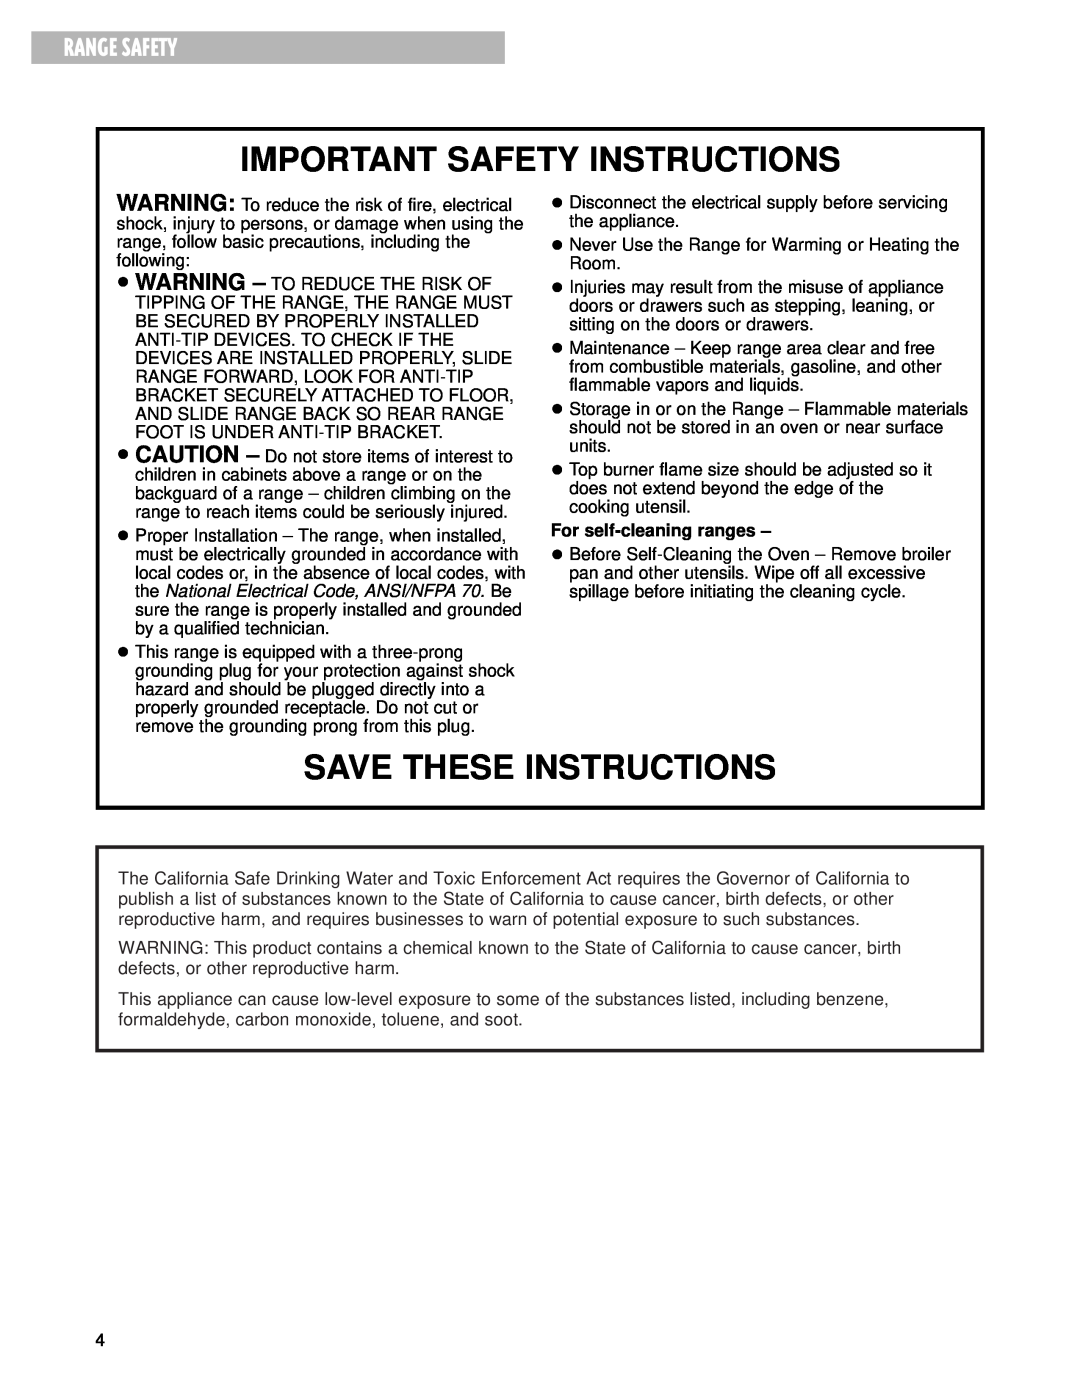 Whirlpool GS395LEH warranty Range Safety, Important Safety Instructions, Save These Instructions 